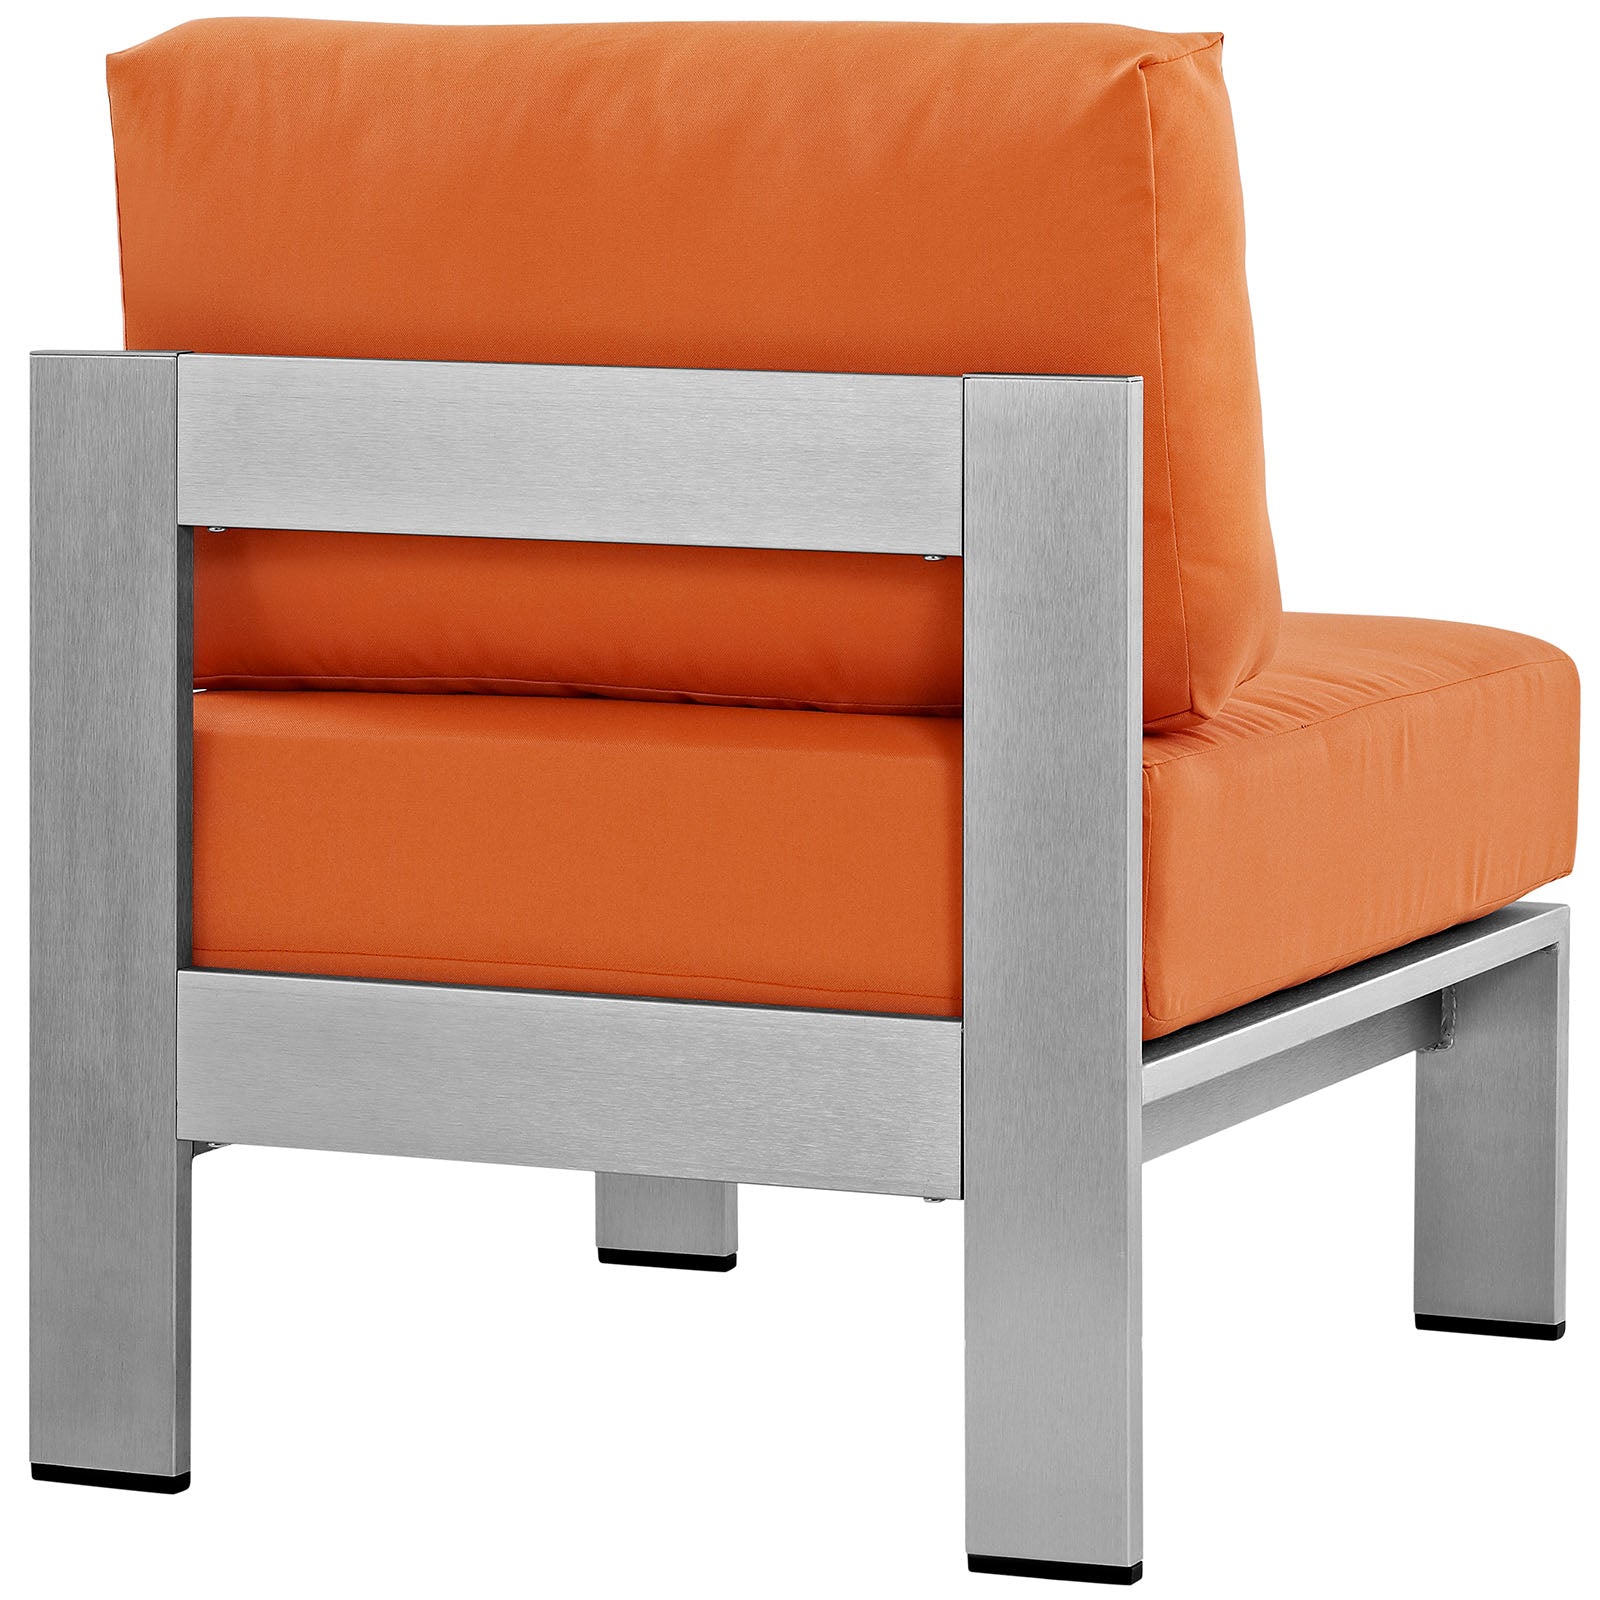 Modway Outdoor Chairs - Shore Armless Outdoor Patio Aluminum Chair Silver Orange